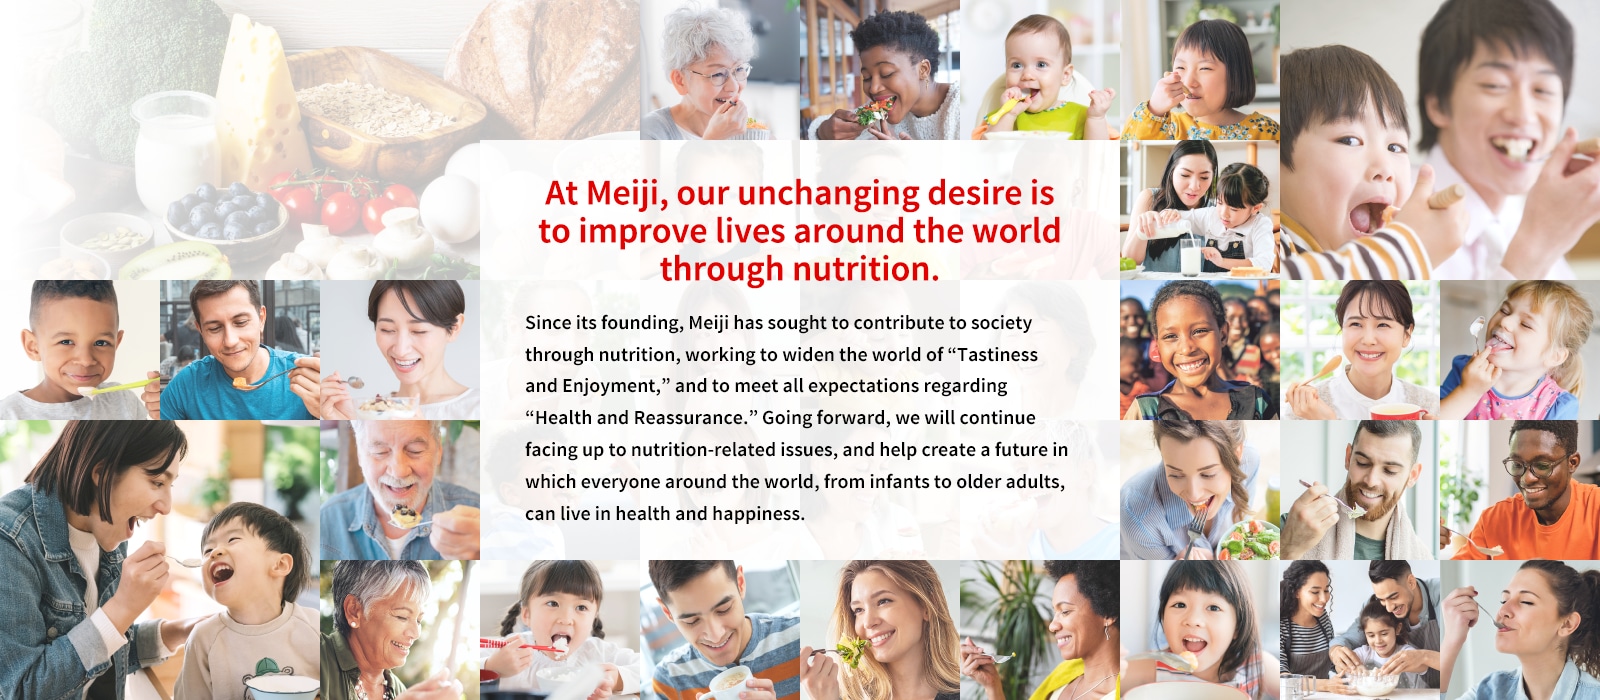 At Meiji, our unchanging desire is to improve lives around the world through nutrition.Since its founding, Meiji has sought to contribute to society through nutrition, working to widen the world of “Tastiness and Enjoyment,” and to meet all expectations regarding “Health and Reassurance.” Going forward, we will continue facing up to nutrition-related issues, and help create a future in which everyone around the world, from infants to older adults, can live in health and happiness.Photo collage: A photo collage with the title “Meiji’s Nutrition Initiatives” featuring photos of people from around the world smiling and eating.